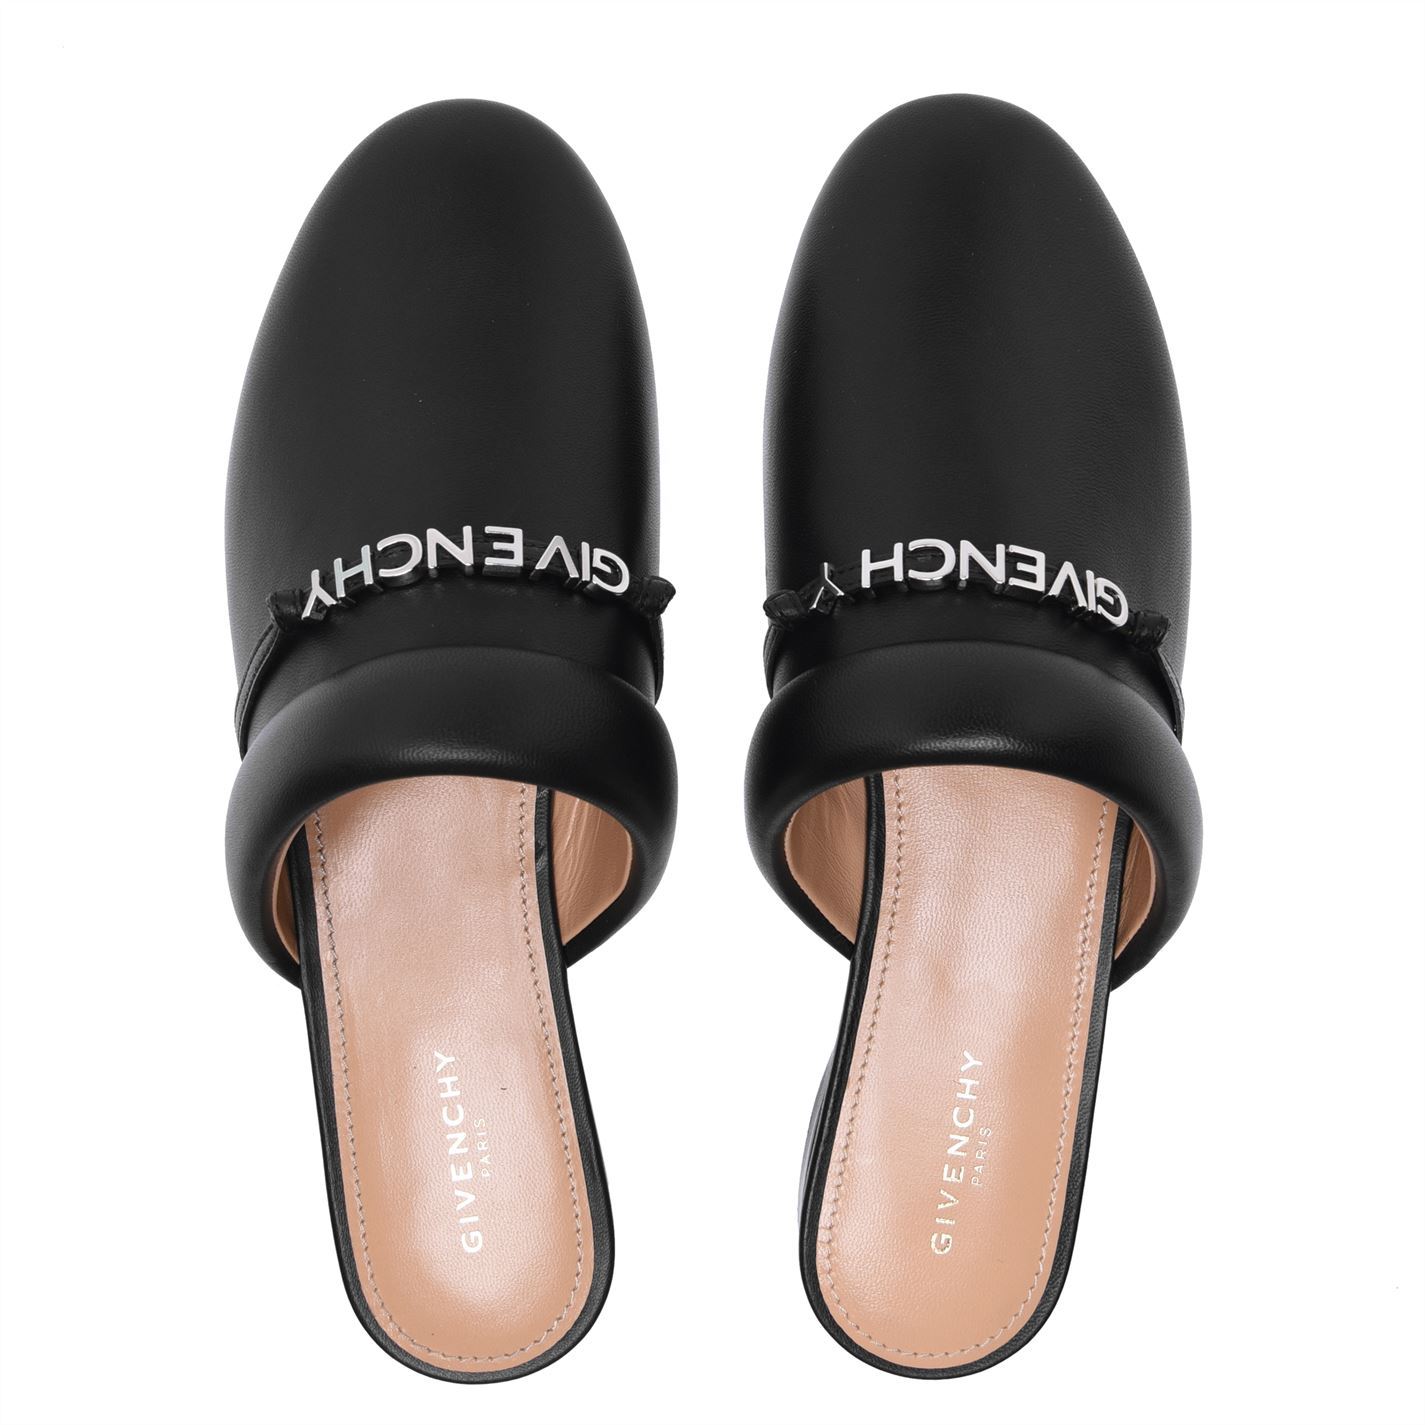 Givenchy Black Leather Mule Slip On Womens Sliders Givenchy 